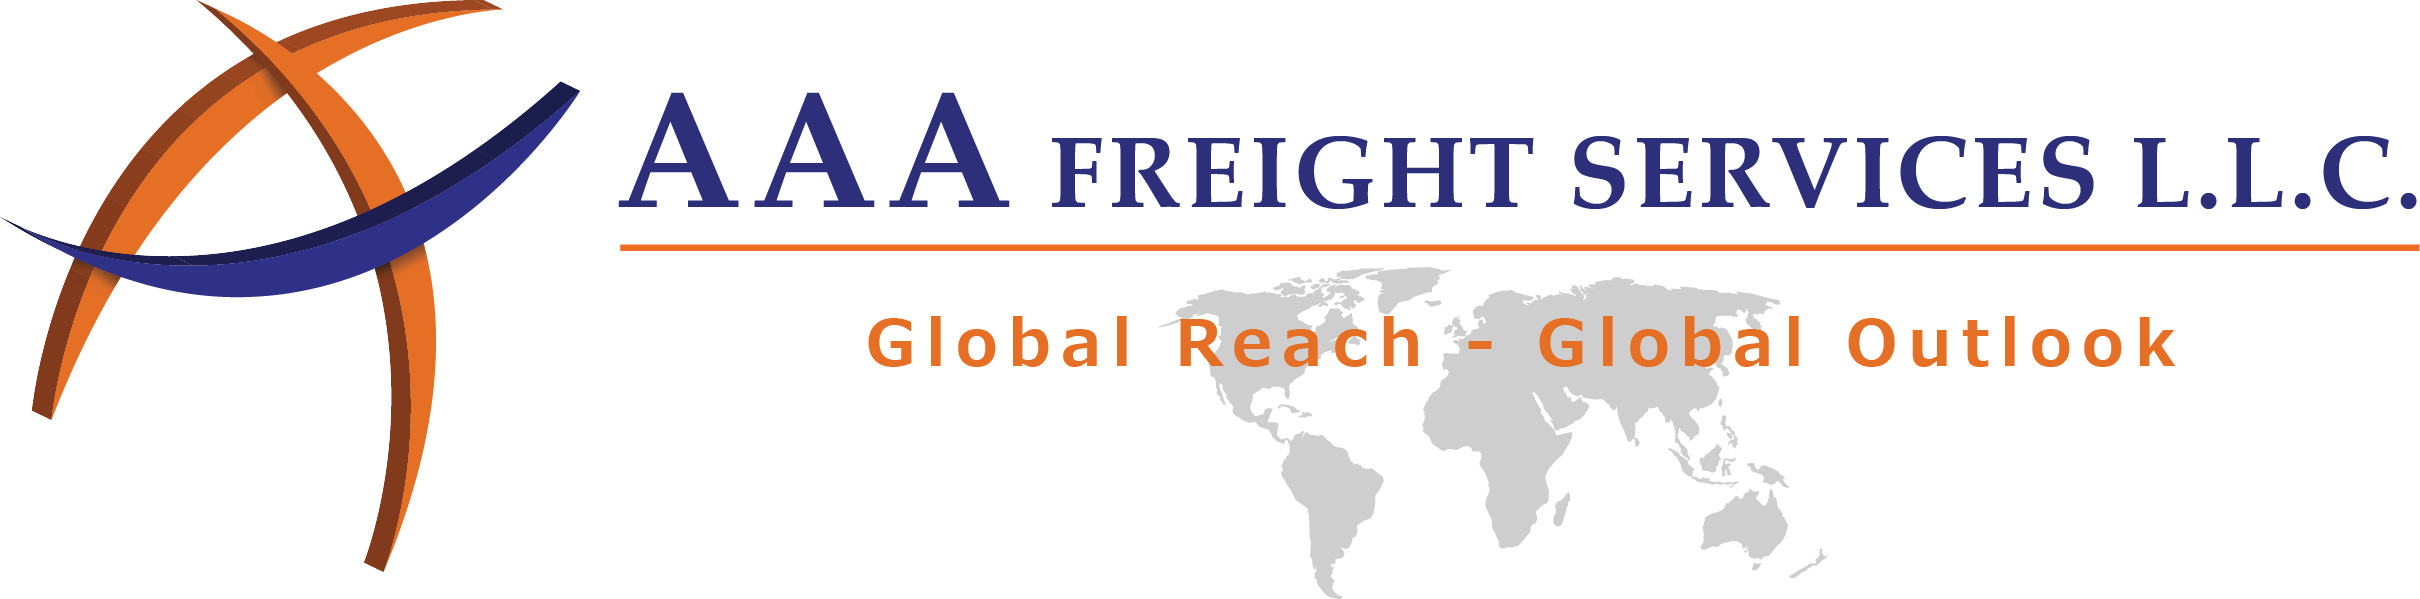 AAA FREIGHT SERVICES L.L.C world's leading Freight Services in UAE